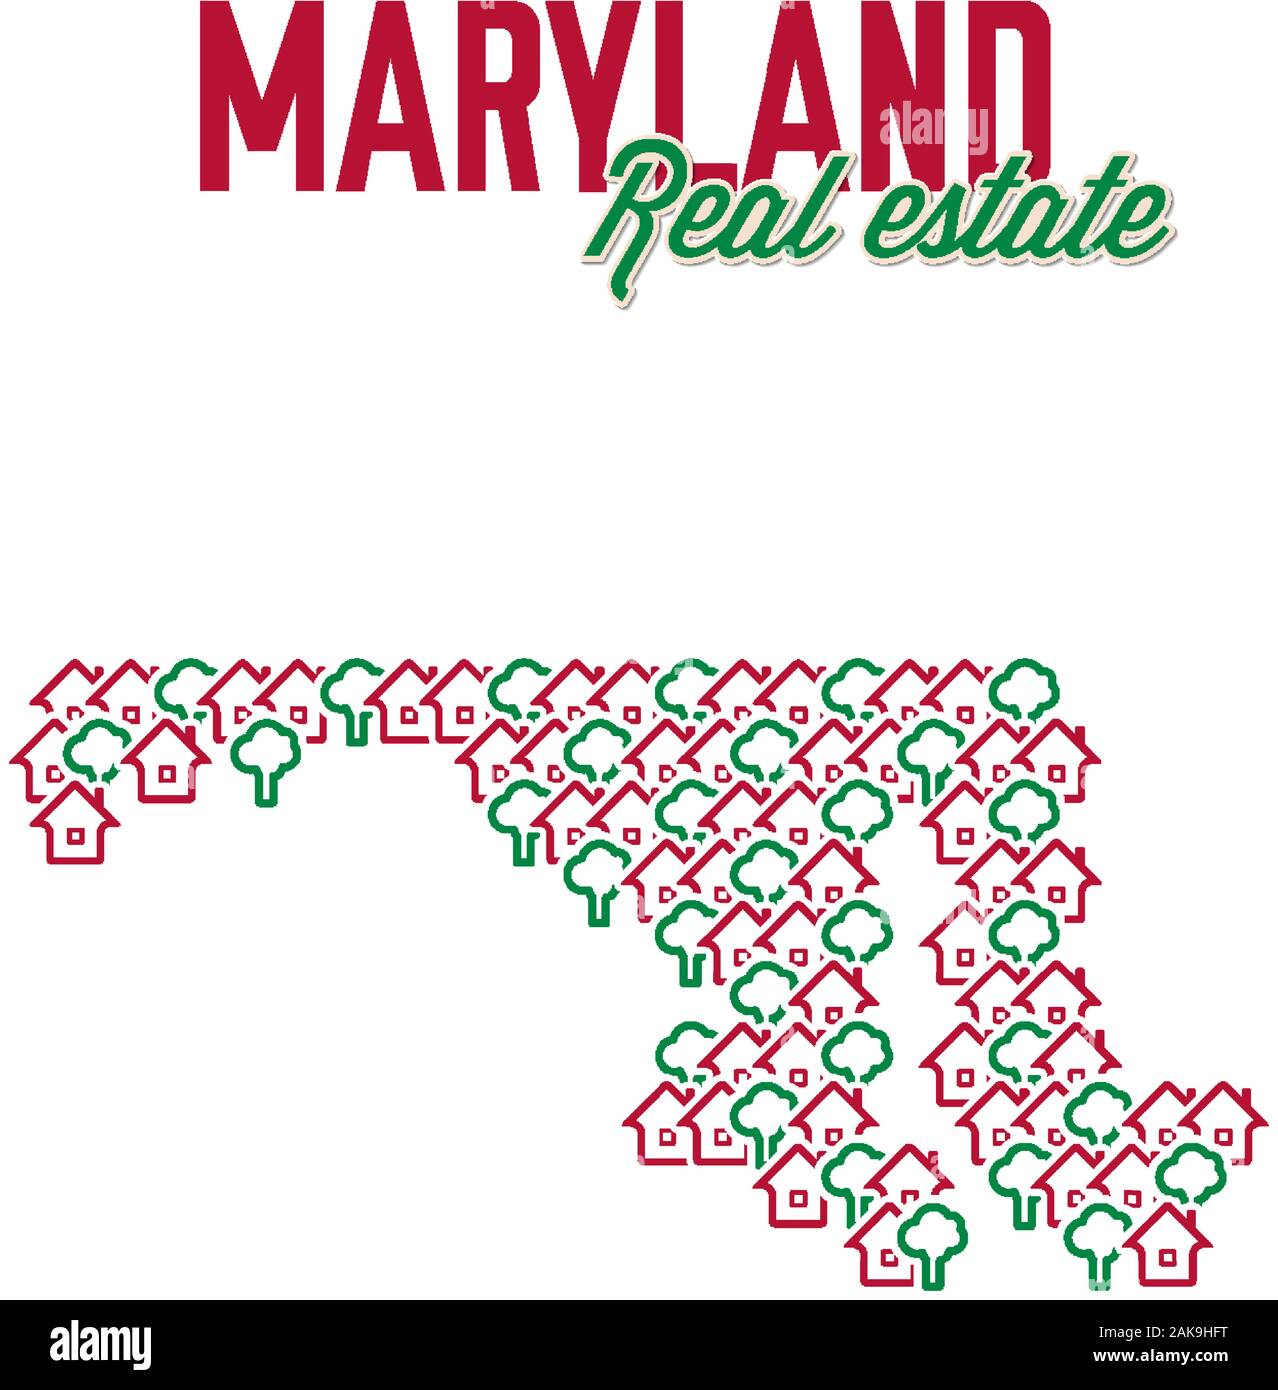 Maryland real estate properties map. Text design. Maryland US state realty creative concept. Icons of houses with gardens in the shape of a map of Mar Stock Vector